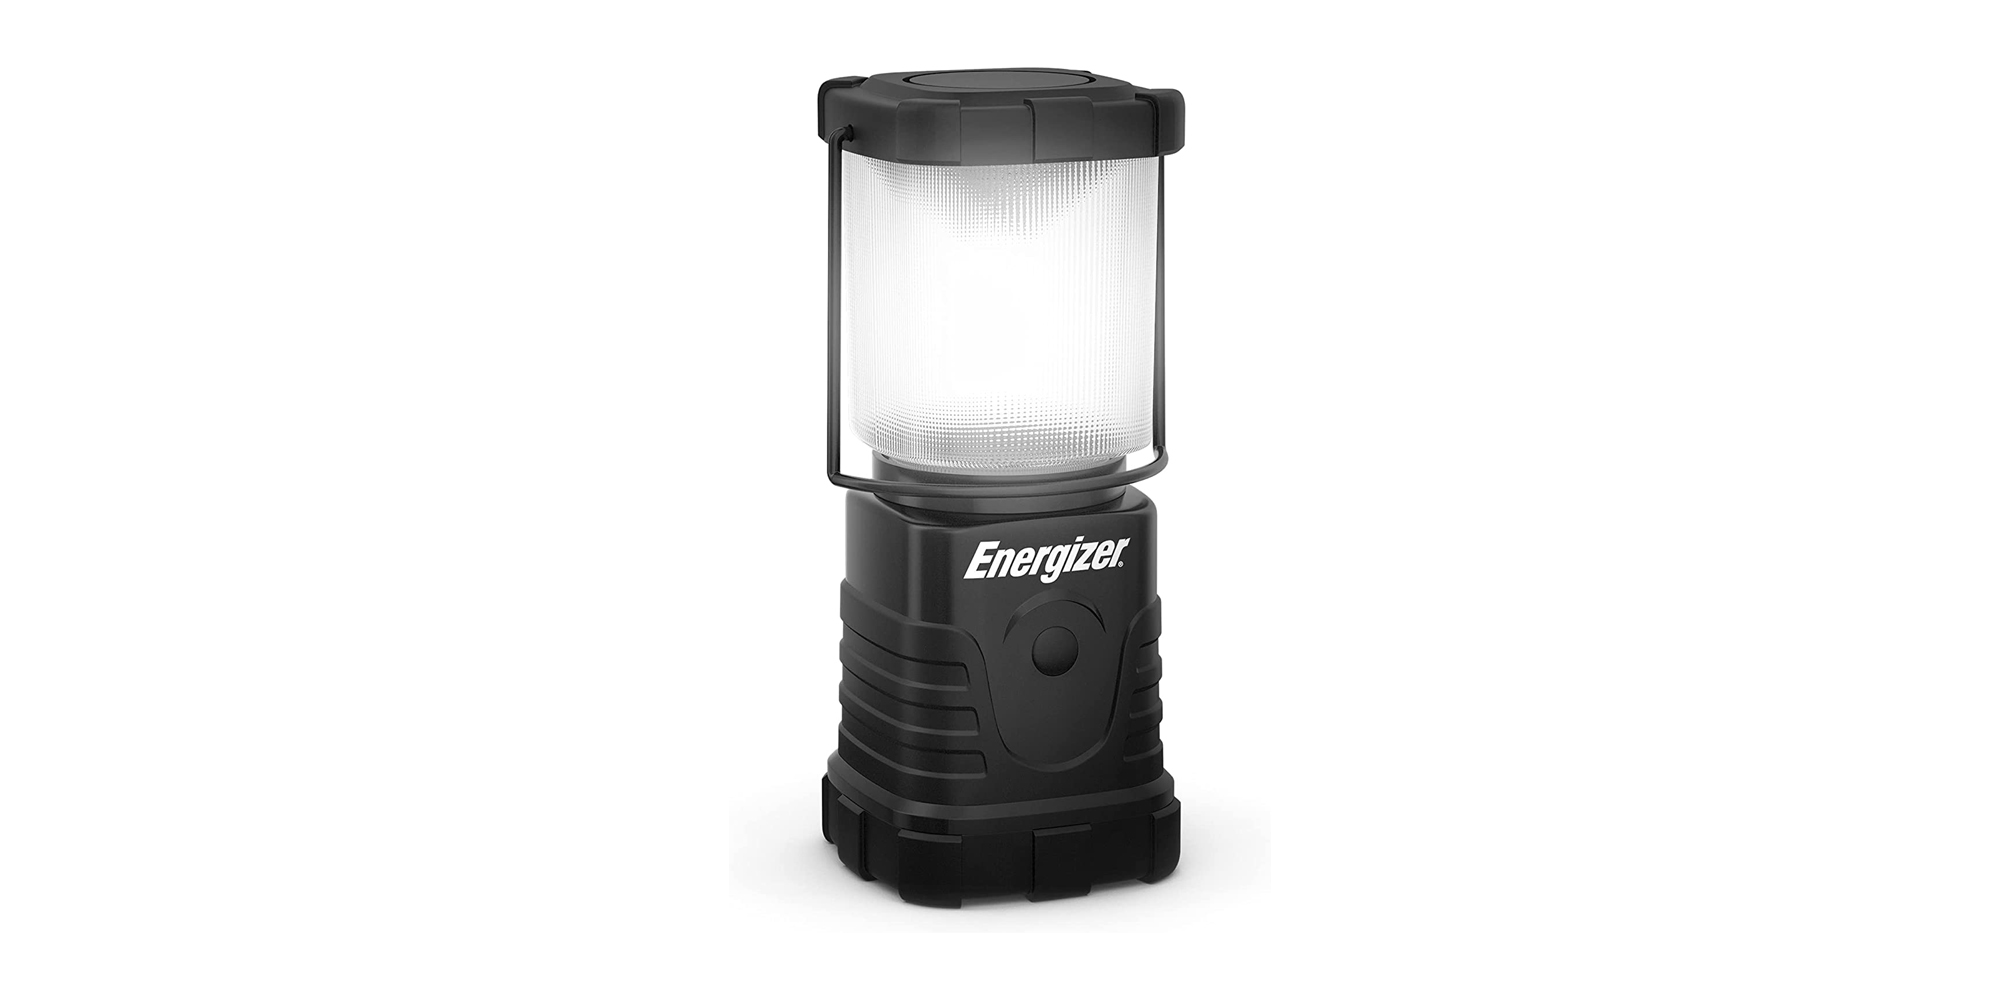 Prepare for camping and storms this summer with Energizer's LED Lantern at  low of $7